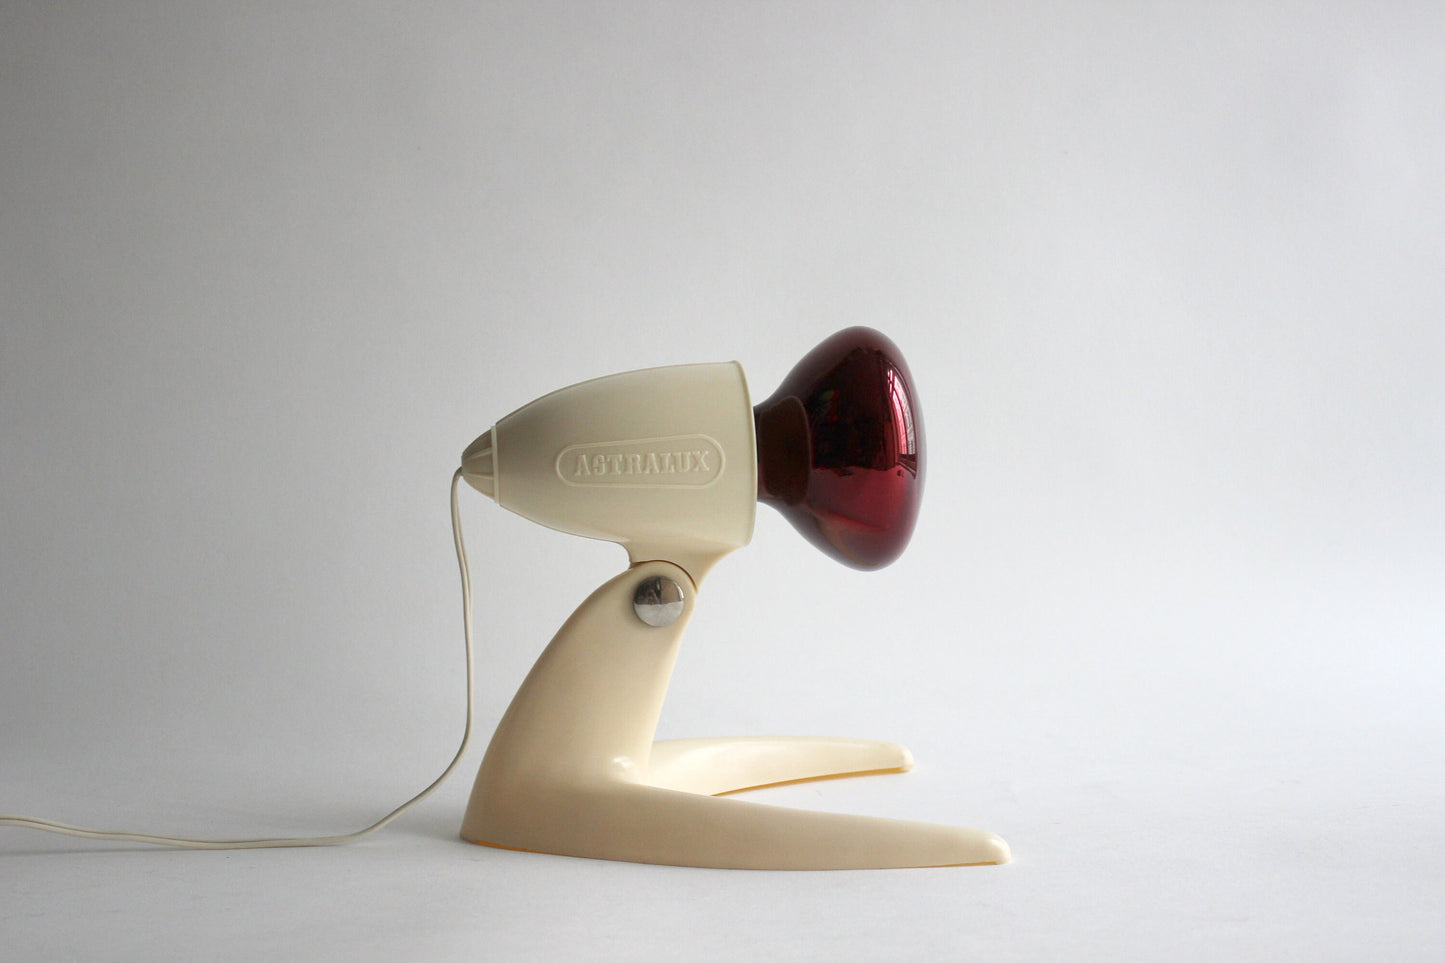 ASTRALUX red light lamp Theratherm „Crow’s foot“ lamp 50s Mid Century - Space Age